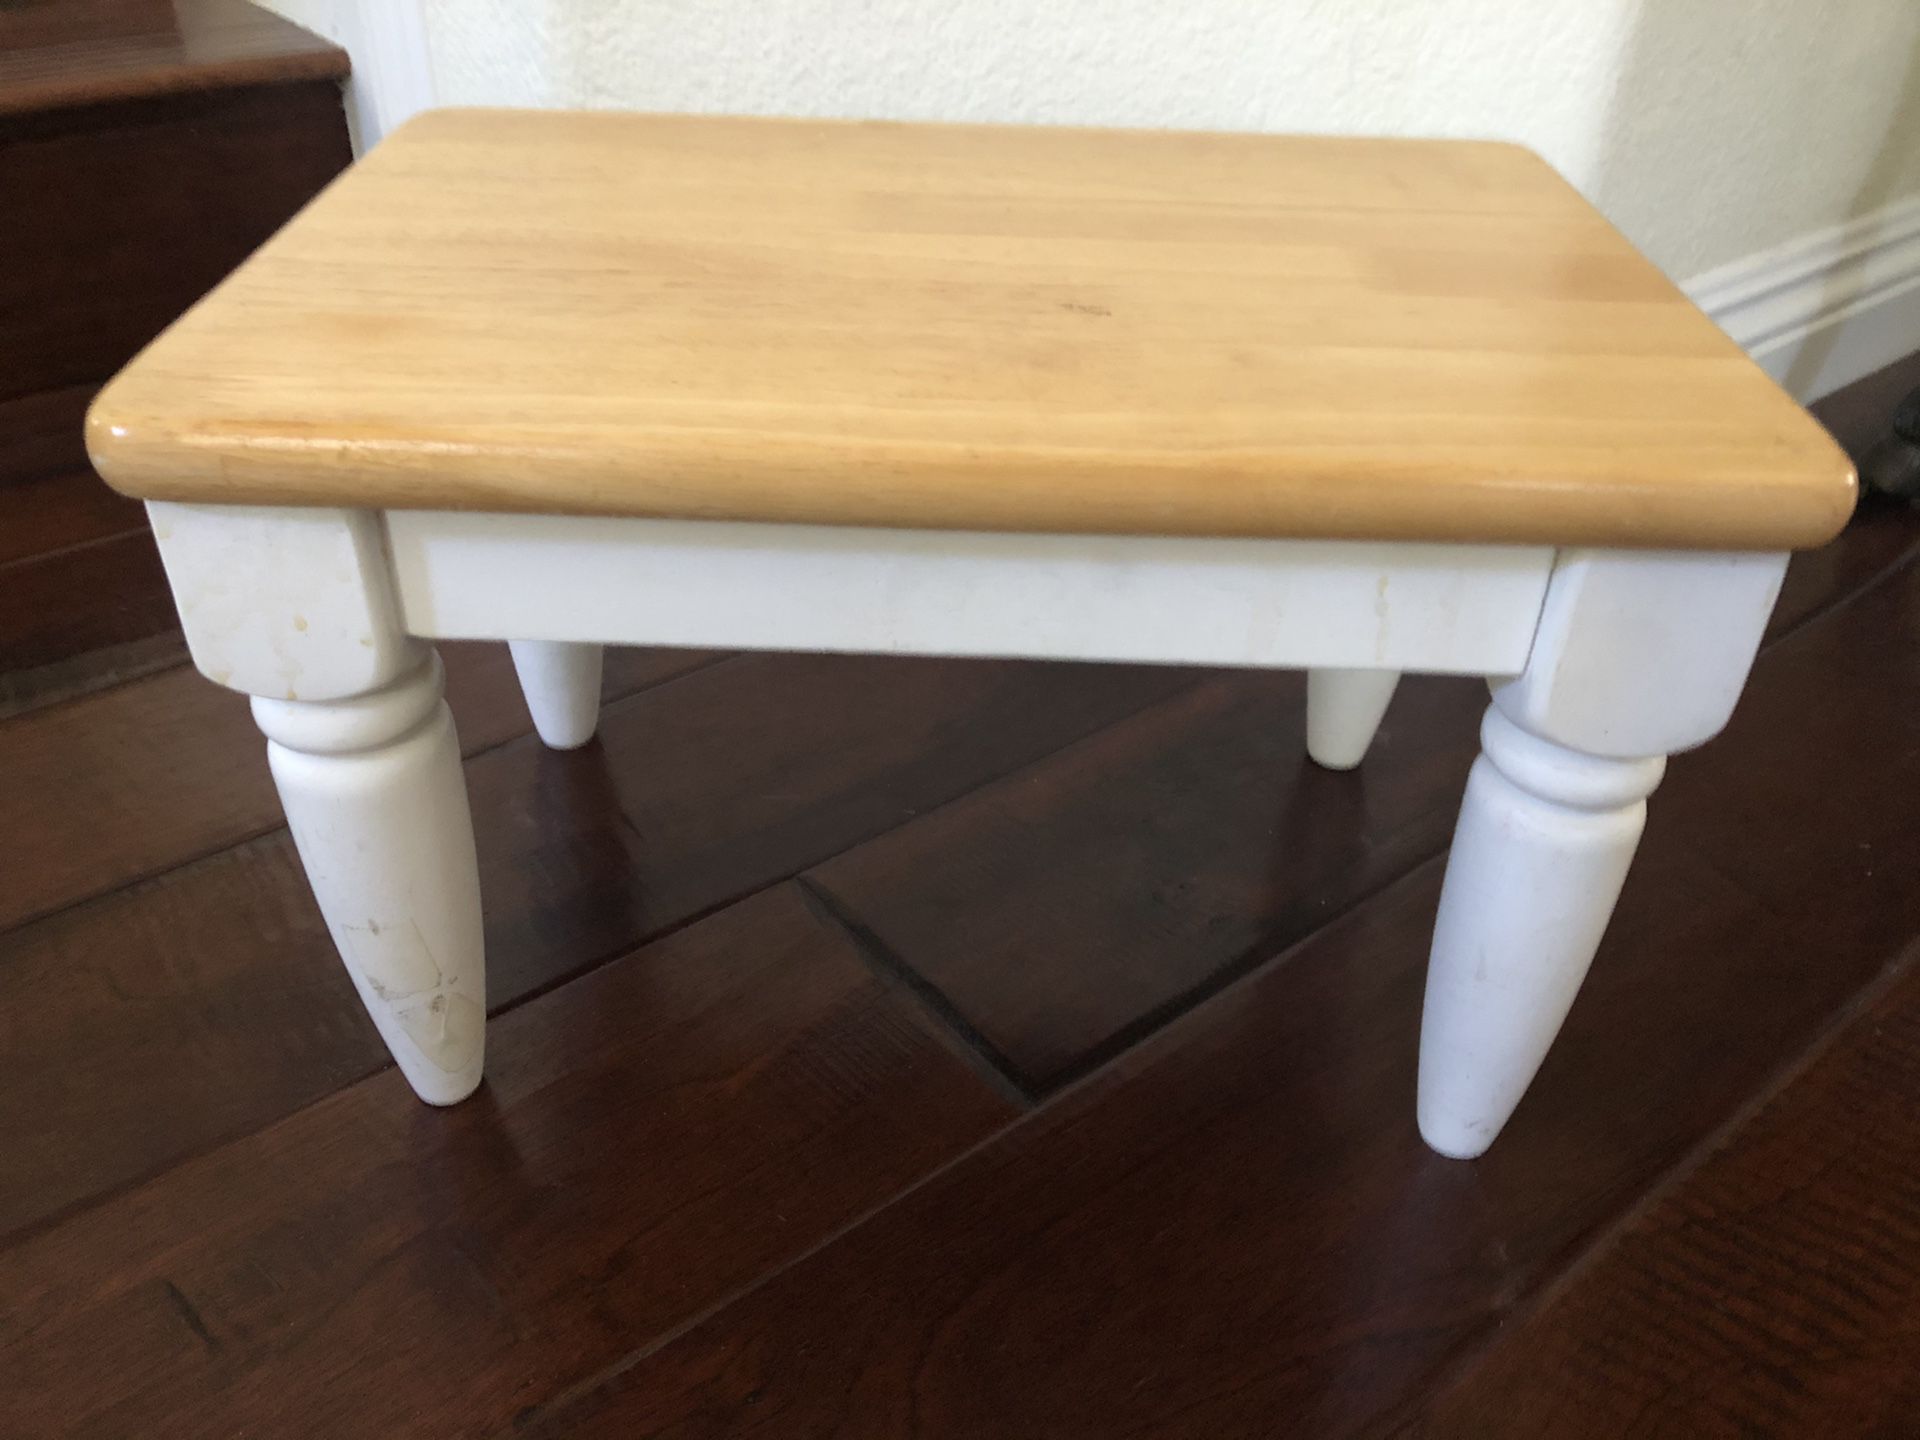 Small wooden foot stool